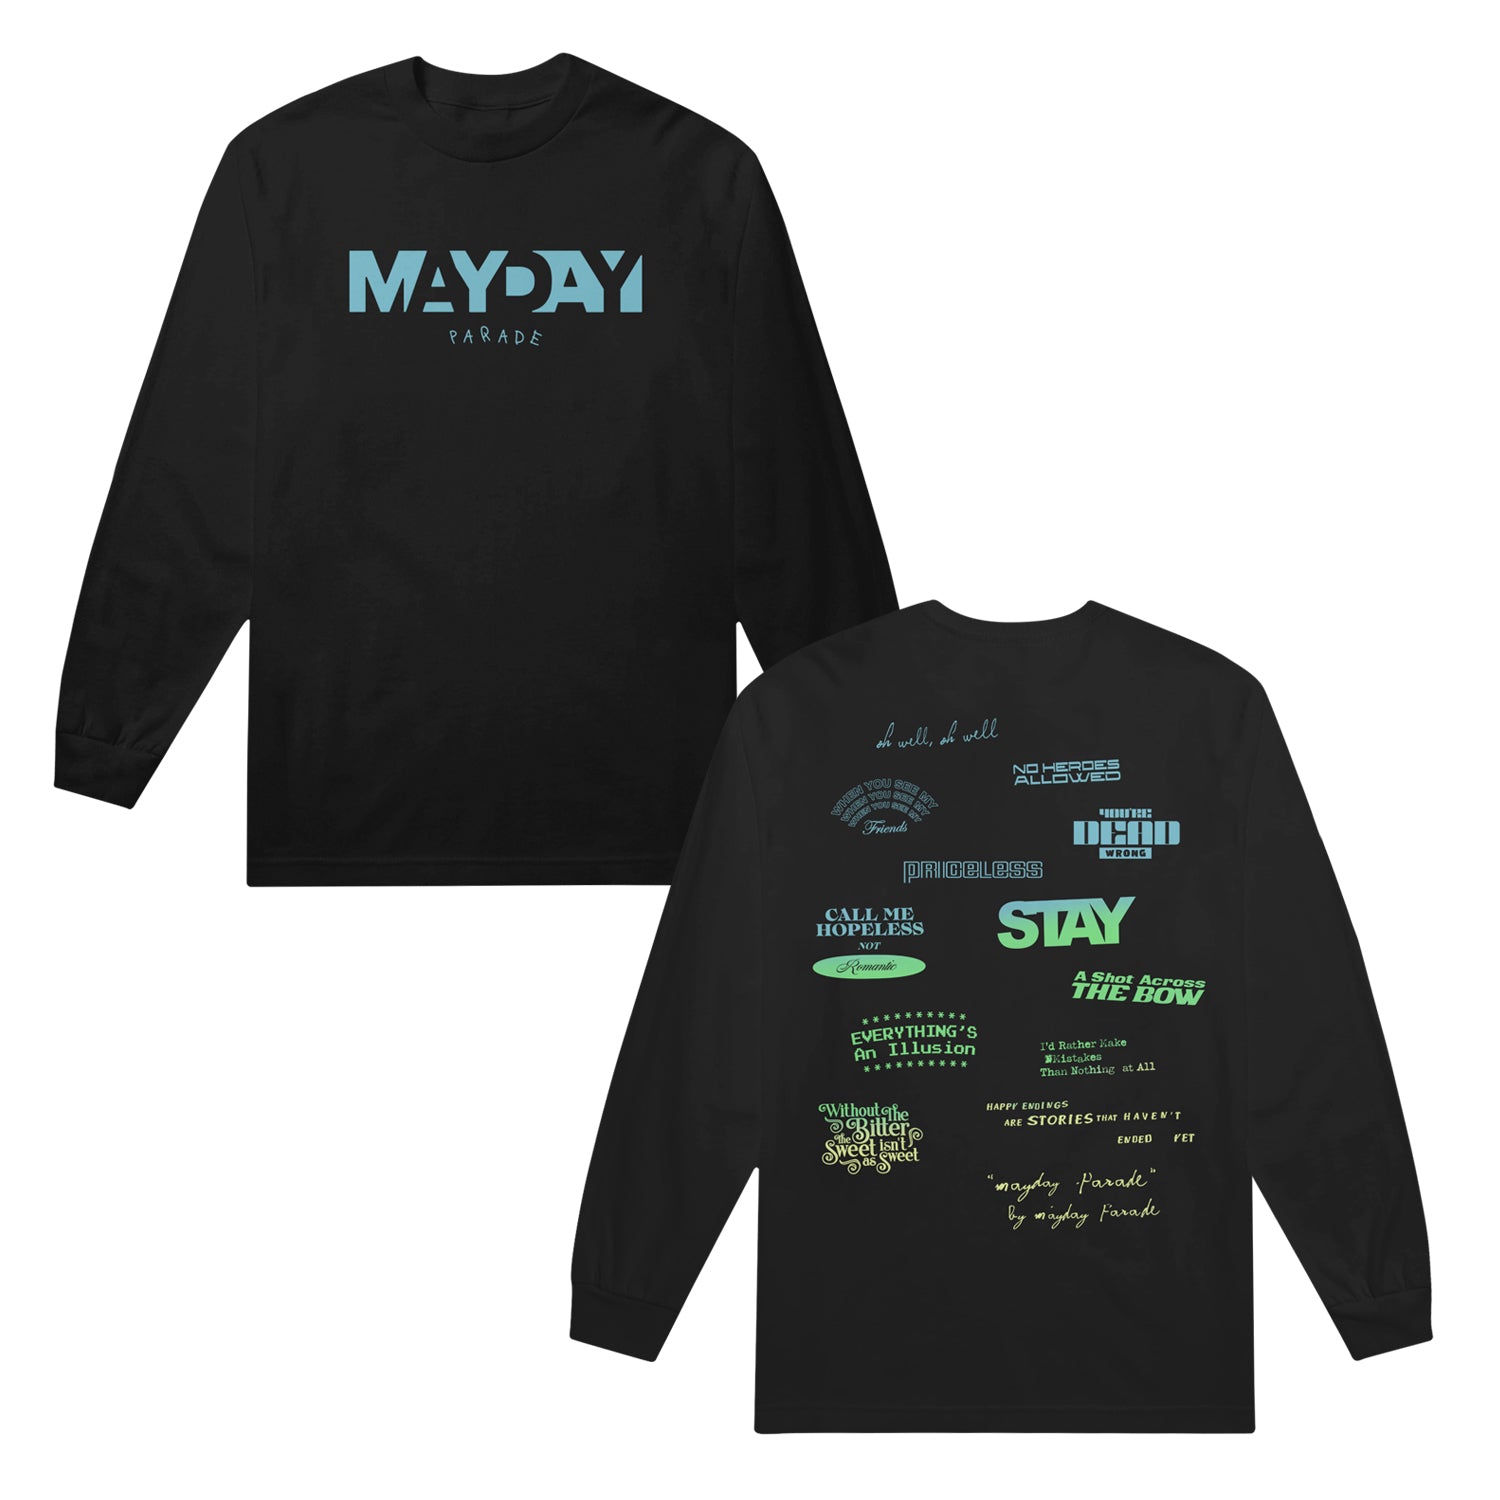 image of the front and back of a black long sleeve tee shirt on a white background. front of the tee is on the left and has a small center chest print in blue gradient that says mayday parade. the back of the long sleeve tee is on the right and has the track list scattered around the full back of their self titled album